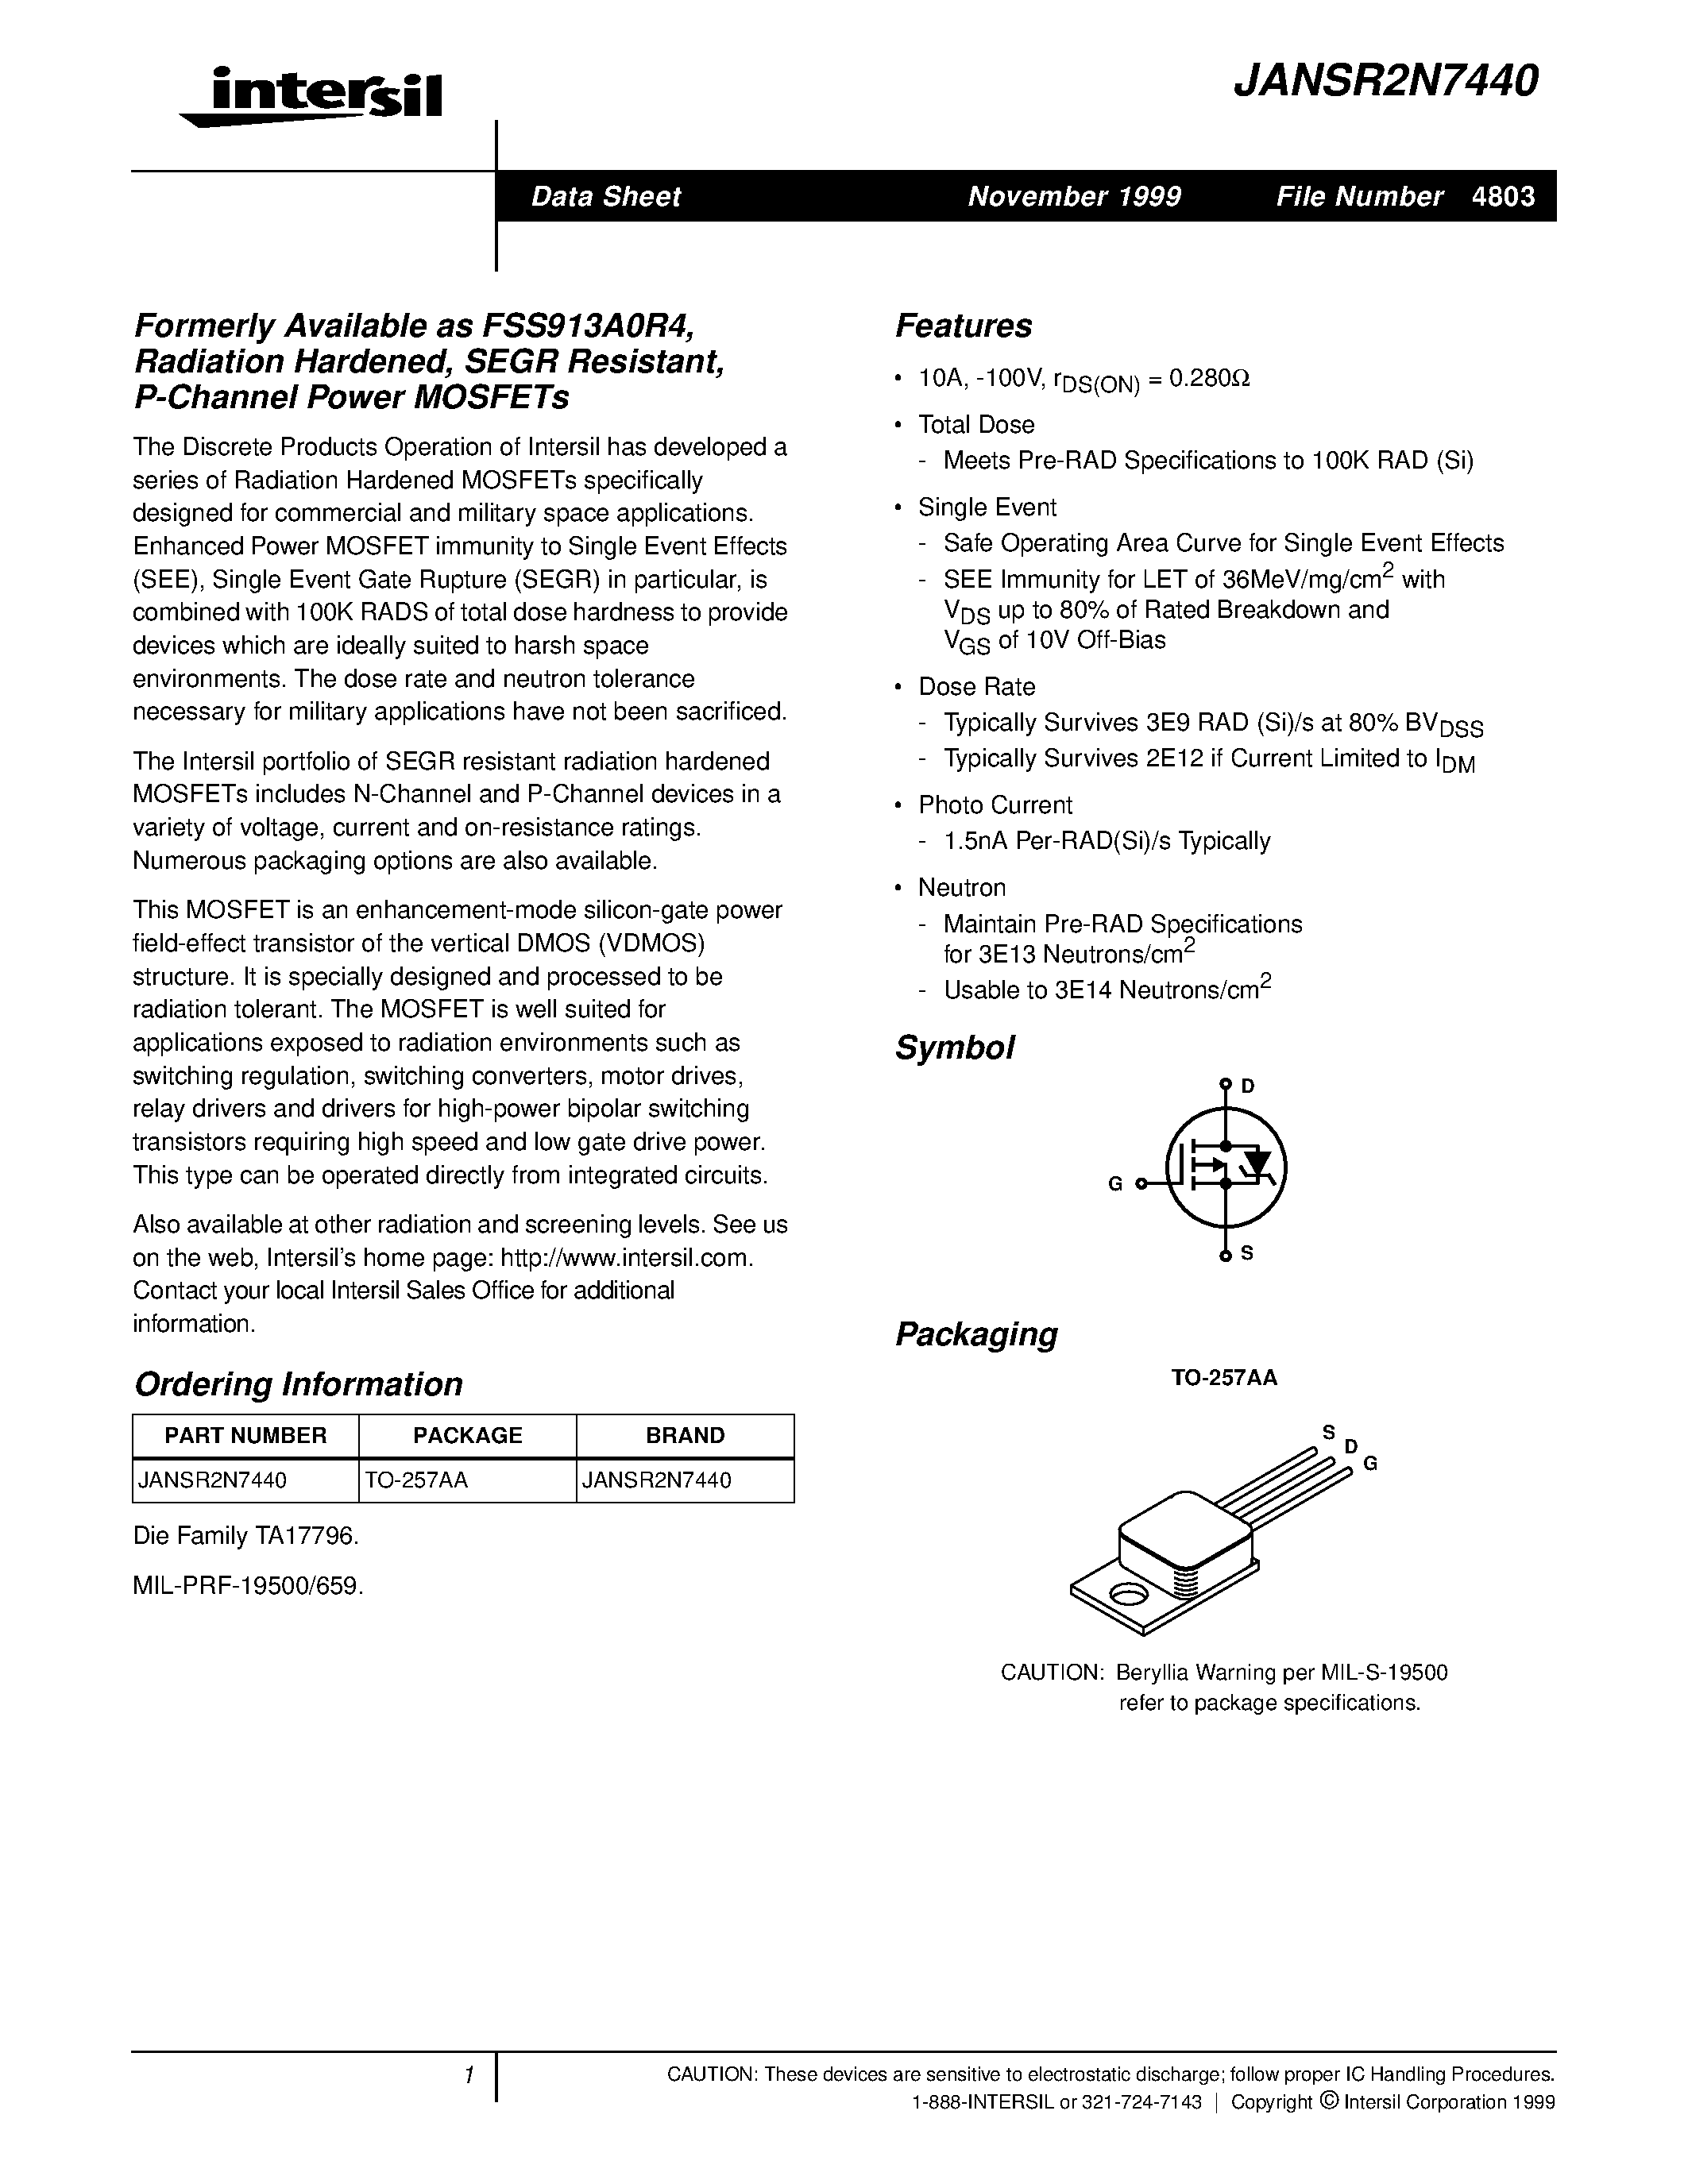 Даташит JANSR2N7440 - Formerly Available as FSS913A0R4/ Radiation Hardened/ SEGR Resistant/ P-Channel Power MOSFETs страница 1